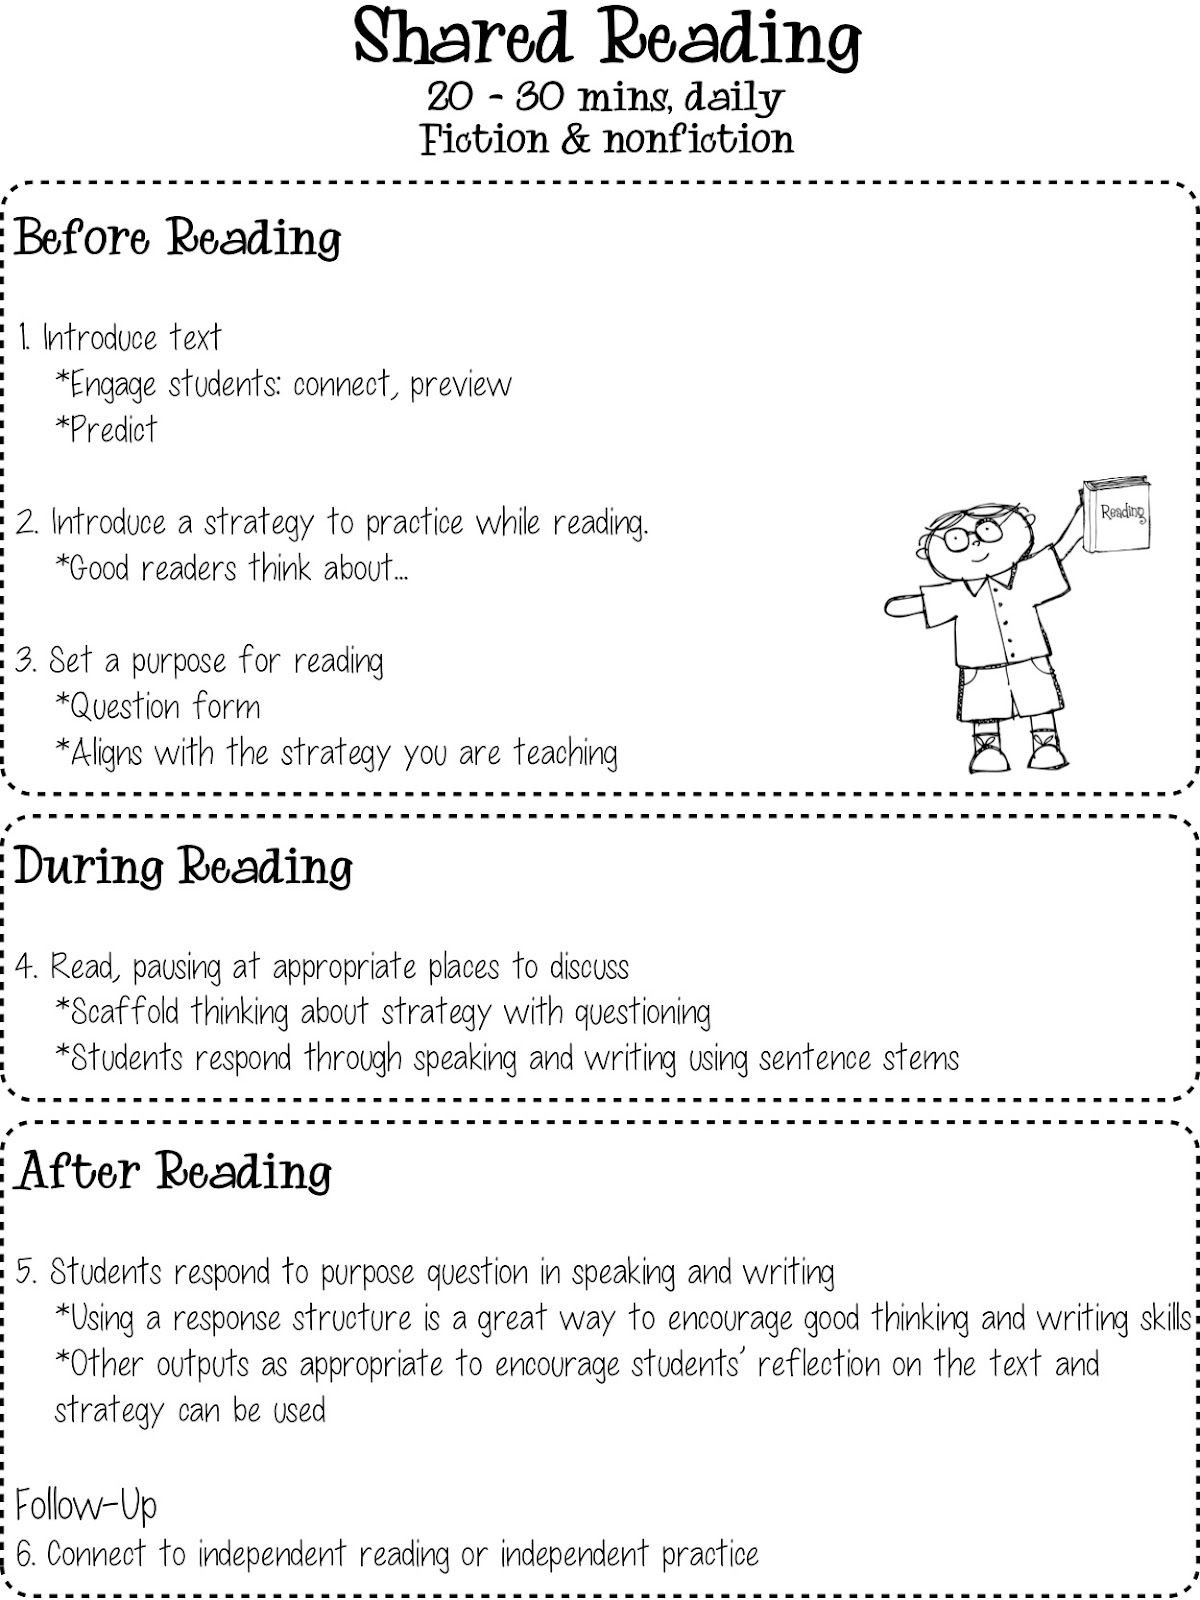 Shared Reading Lesson Plan This Shared Reading Chart is Great for Teachers and